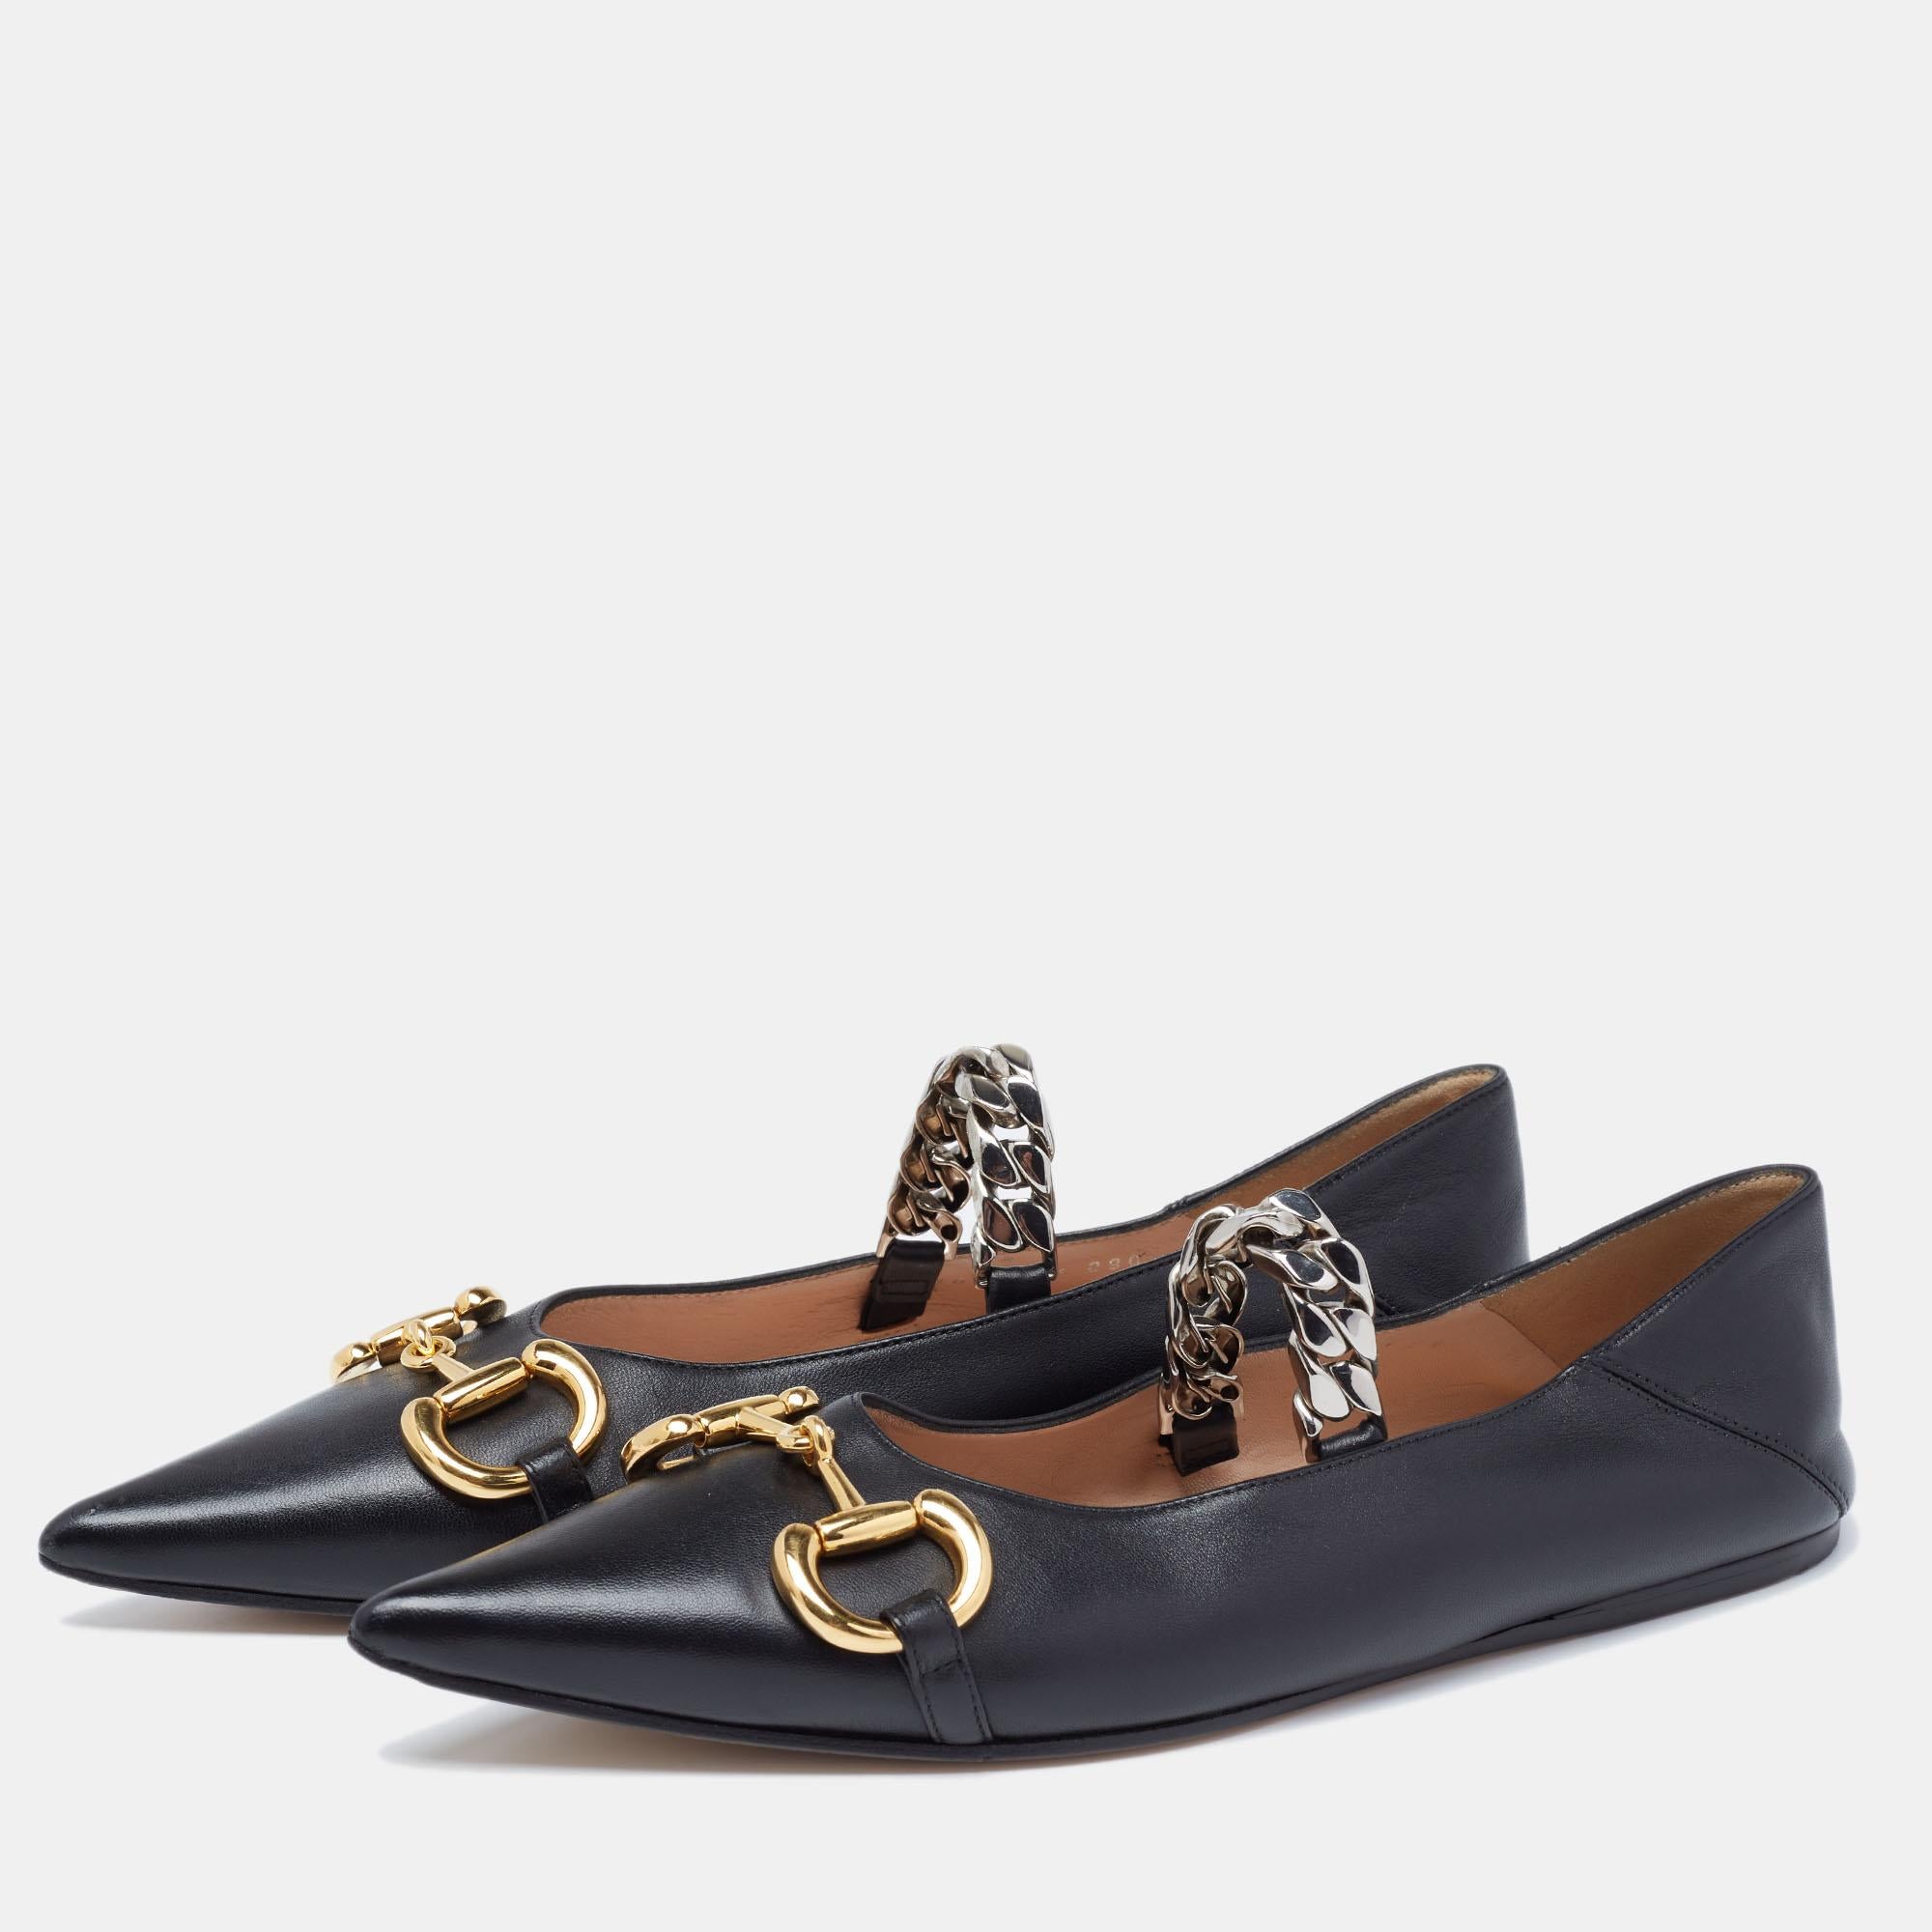 A chic alternative to your pair of pumps is these pretty ballet flats from Gucci. They are equal parts fashionable and functional; therefore, you can team them up with polished work separates, flowy midi dresses, and even pants.